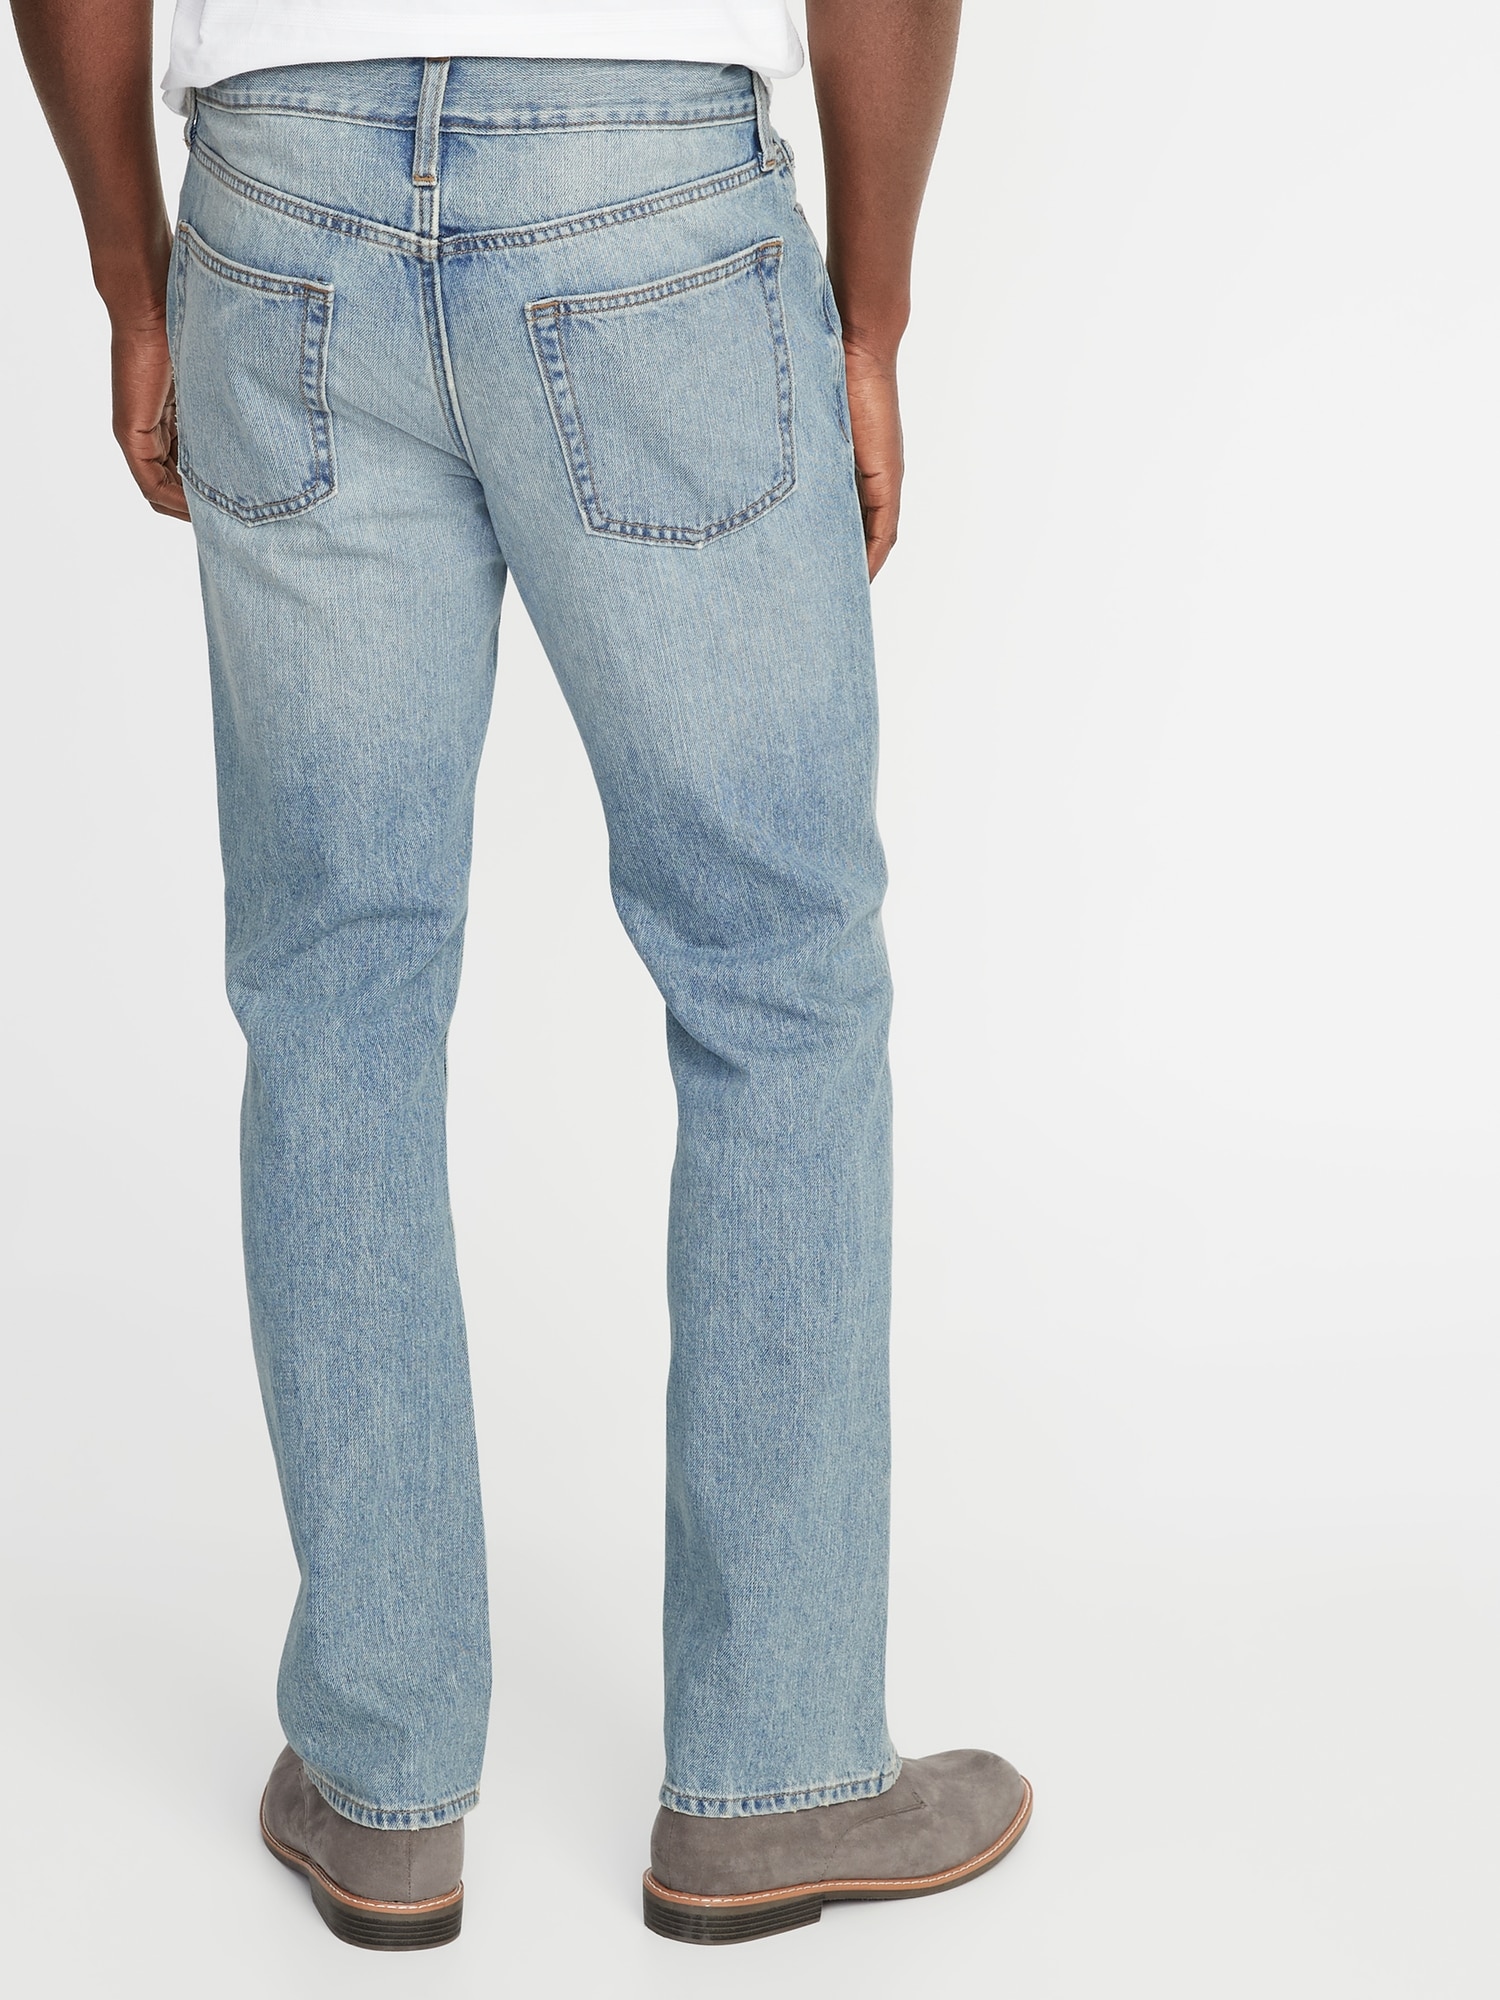 old navy bootcut jeans